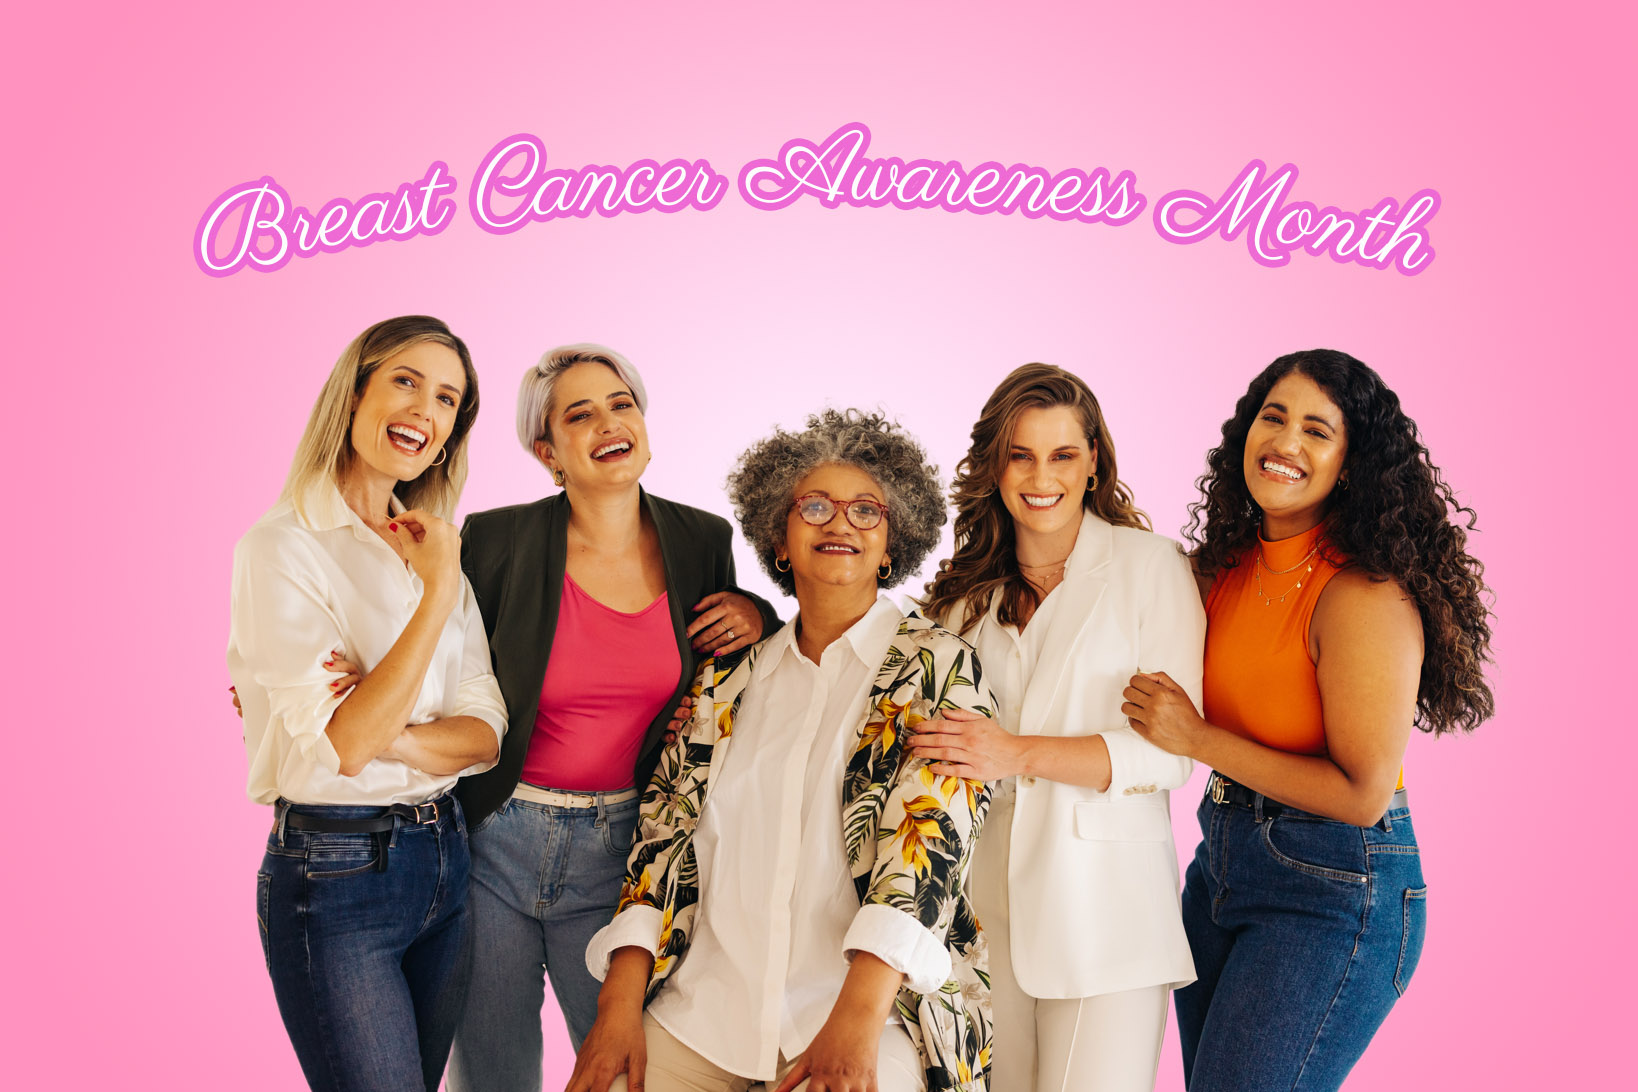 Diverse group of women celebrating Breast Cancer Awareness Month